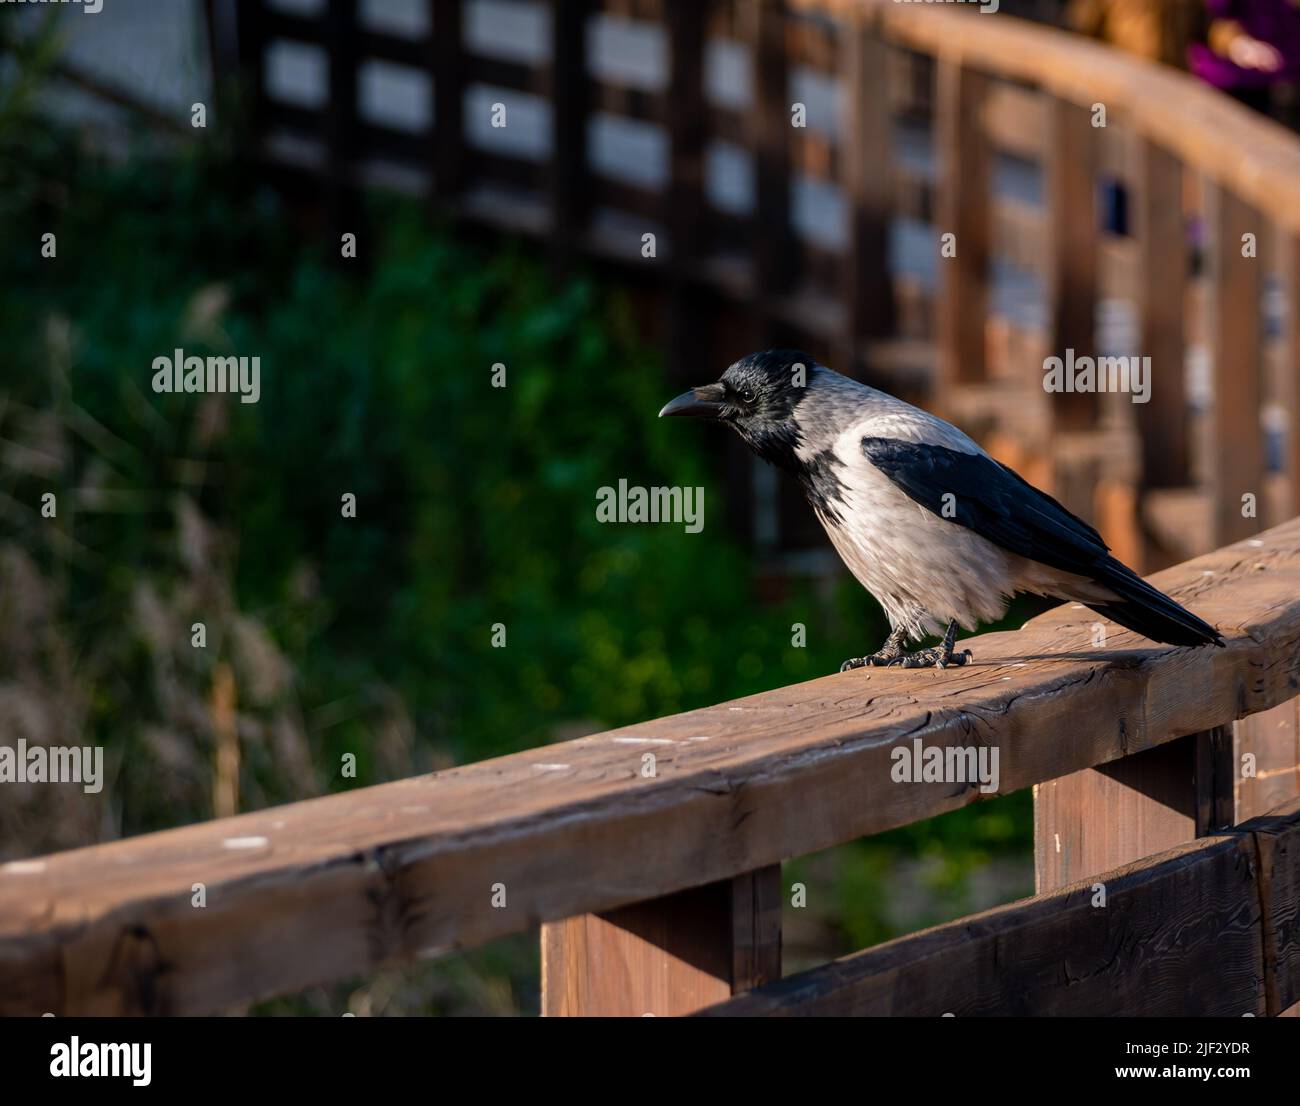 a hooded gray crow rests resting on the edge of a wooden deck Stock Photo